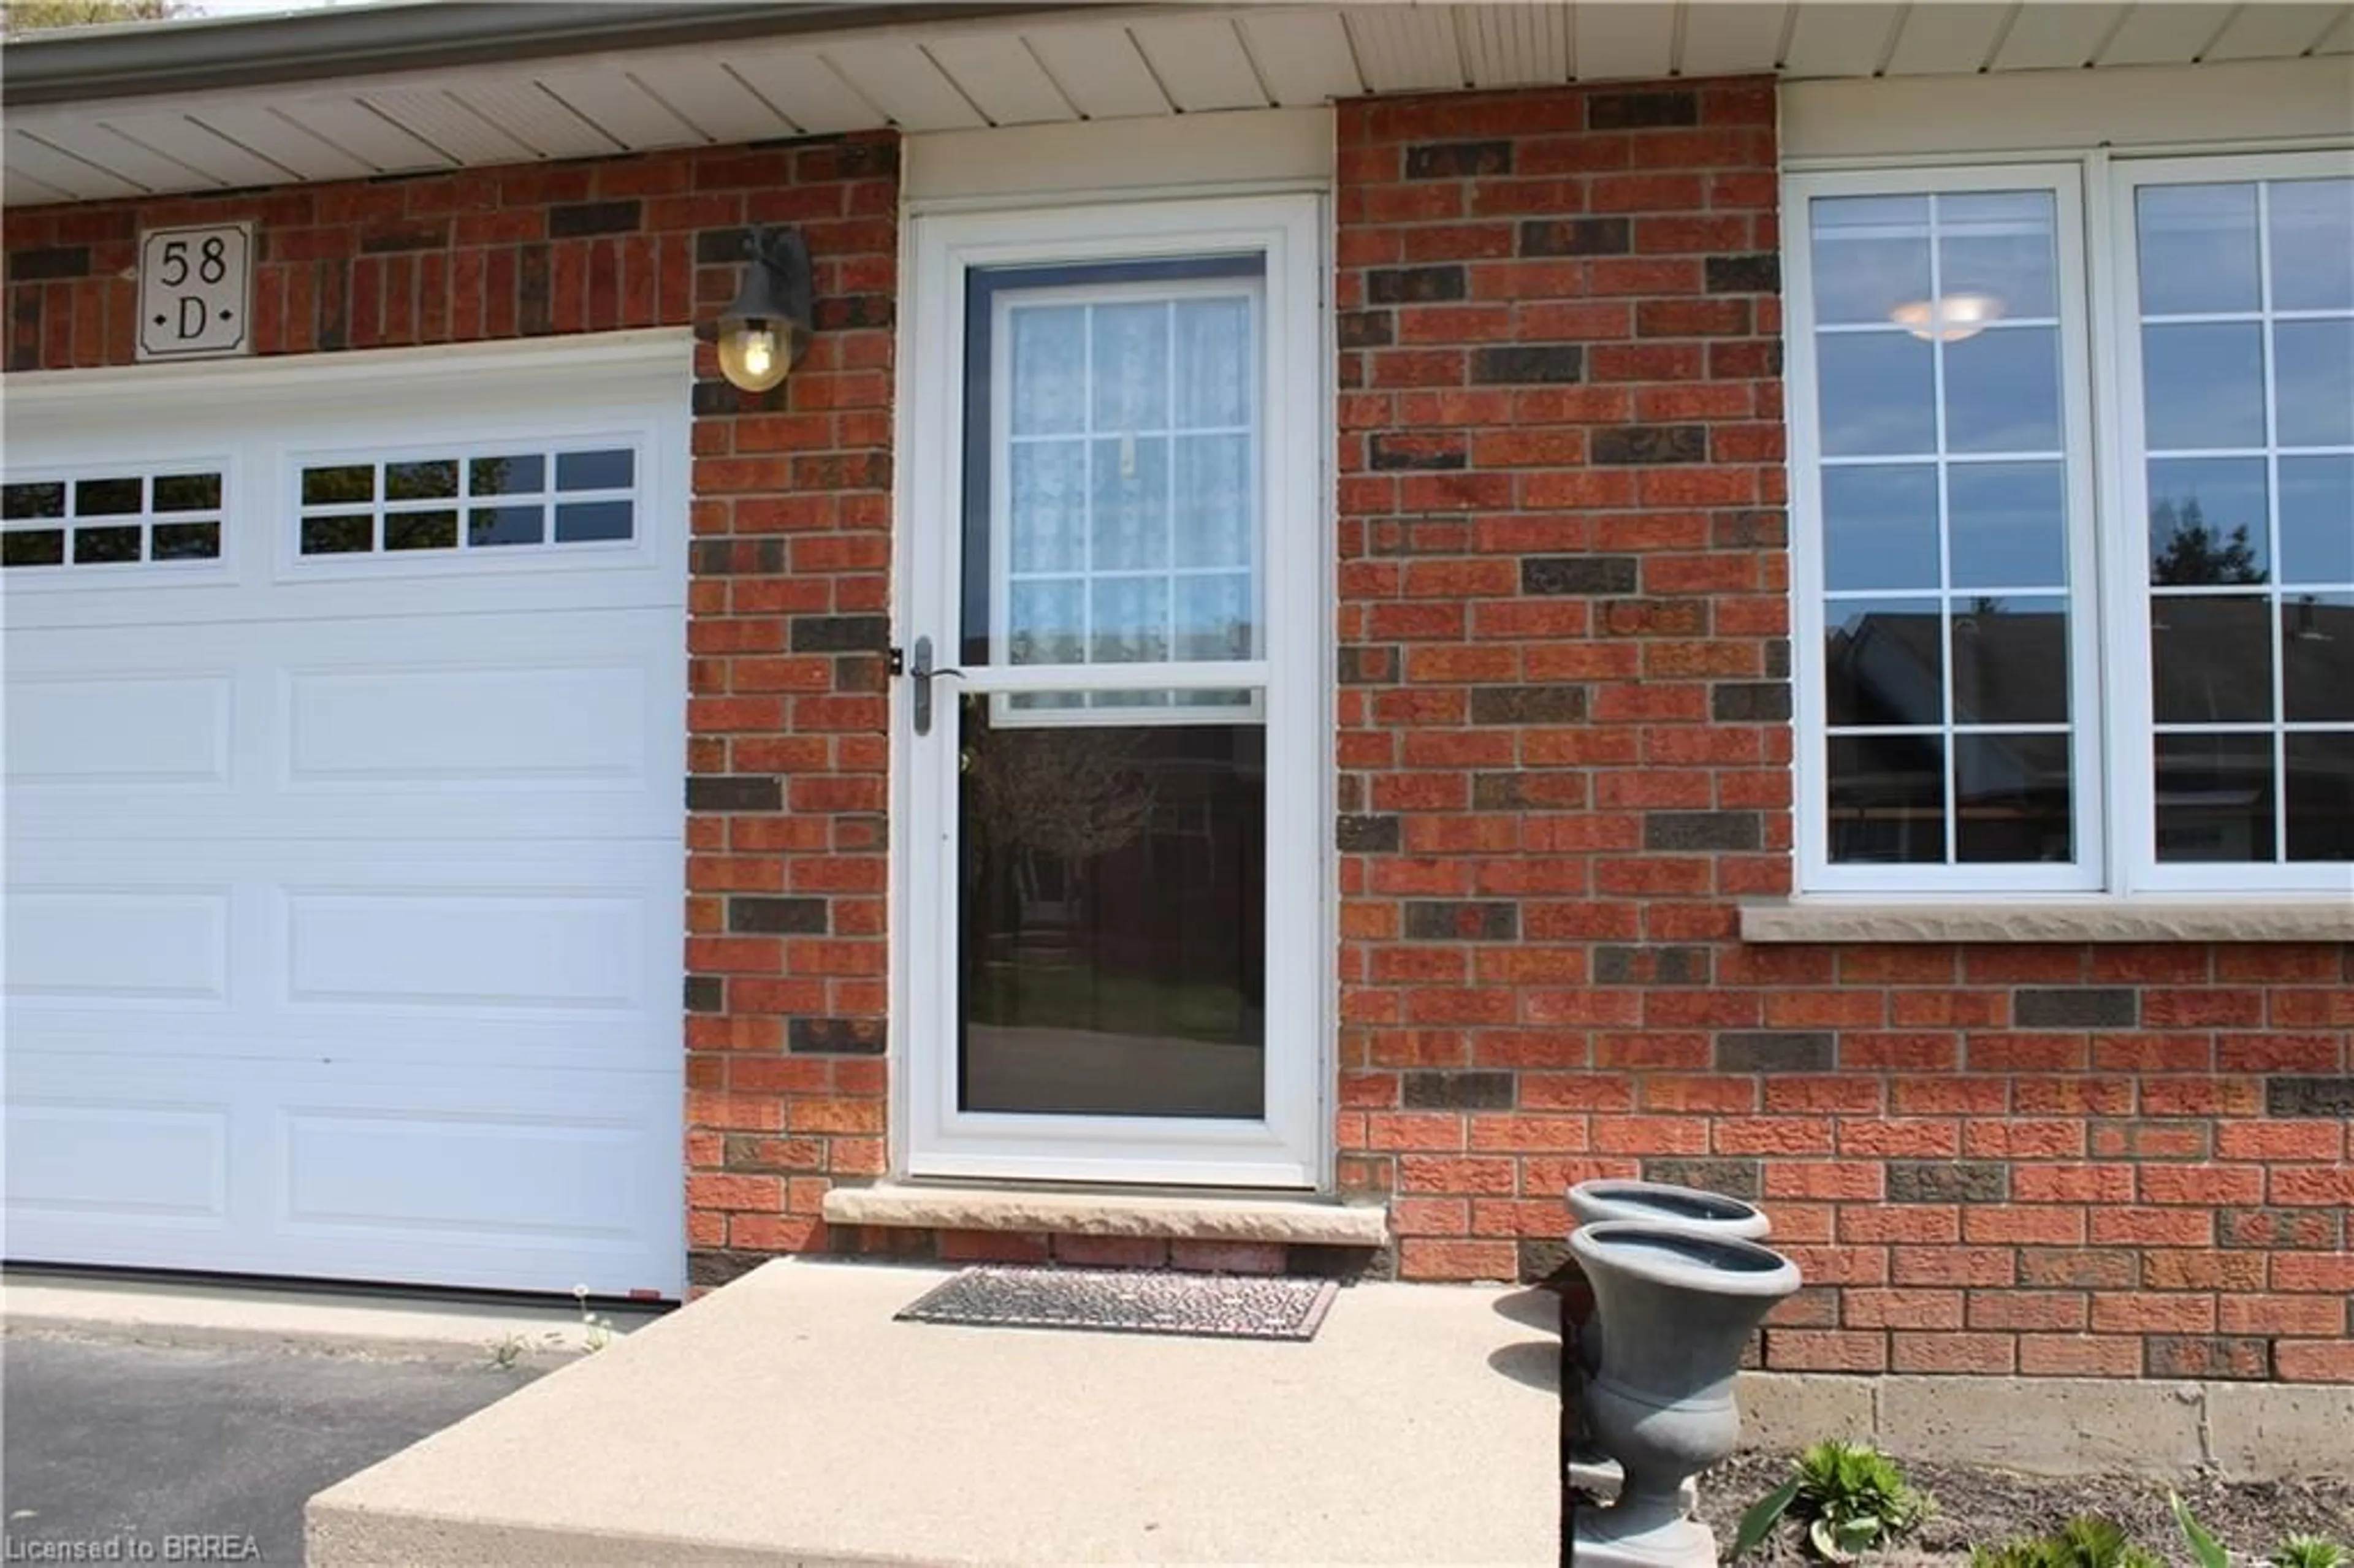 Home with brick exterior material for 58 Harris Ave #D, Brantford Ontario N3R 2E9